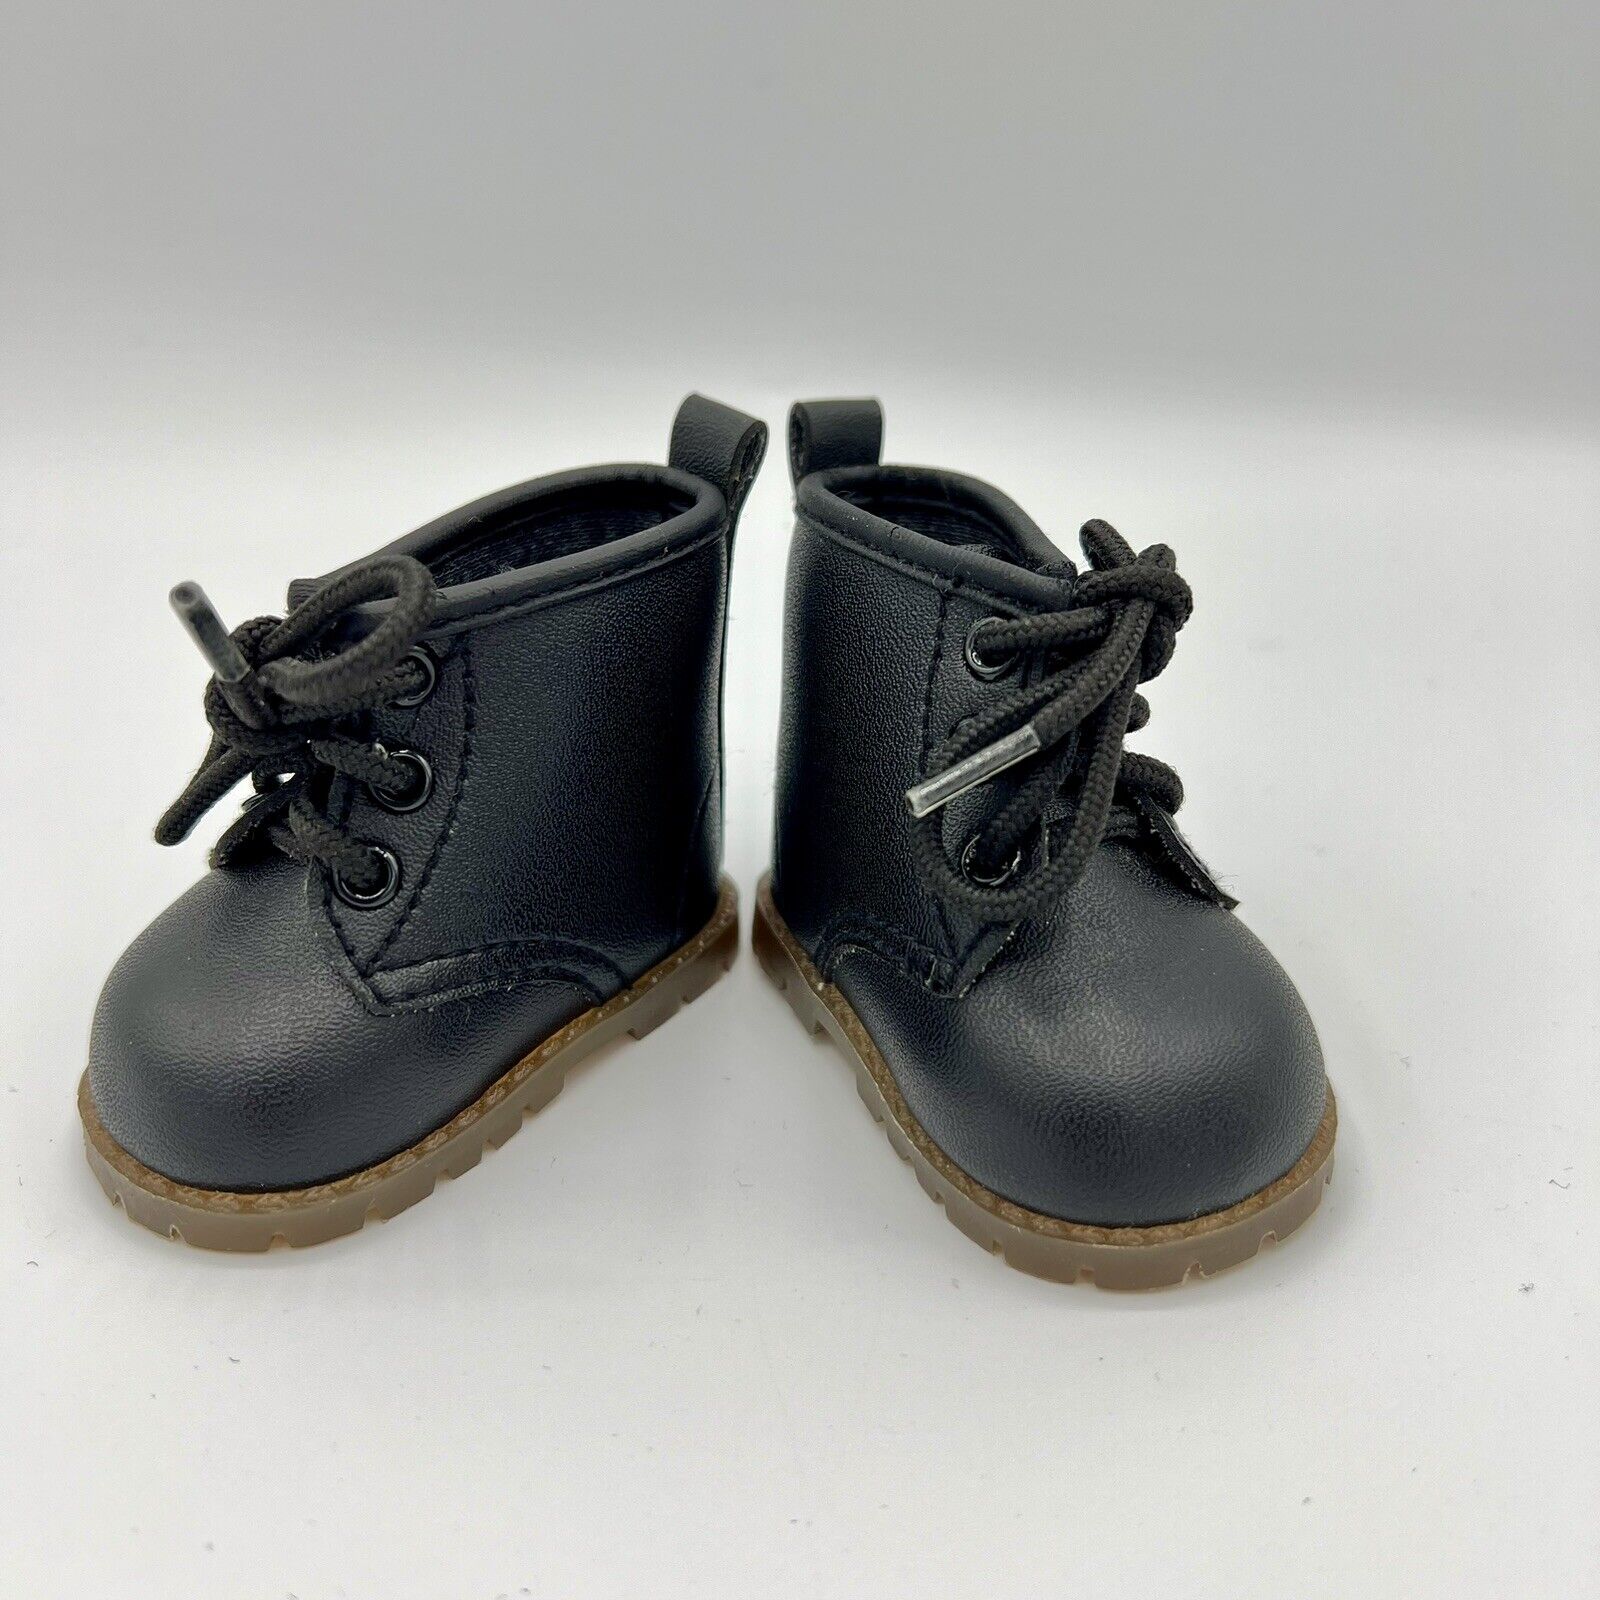 American Girl of Today Doll Boots 1996  Pleasant Company Black Doc Marten Type